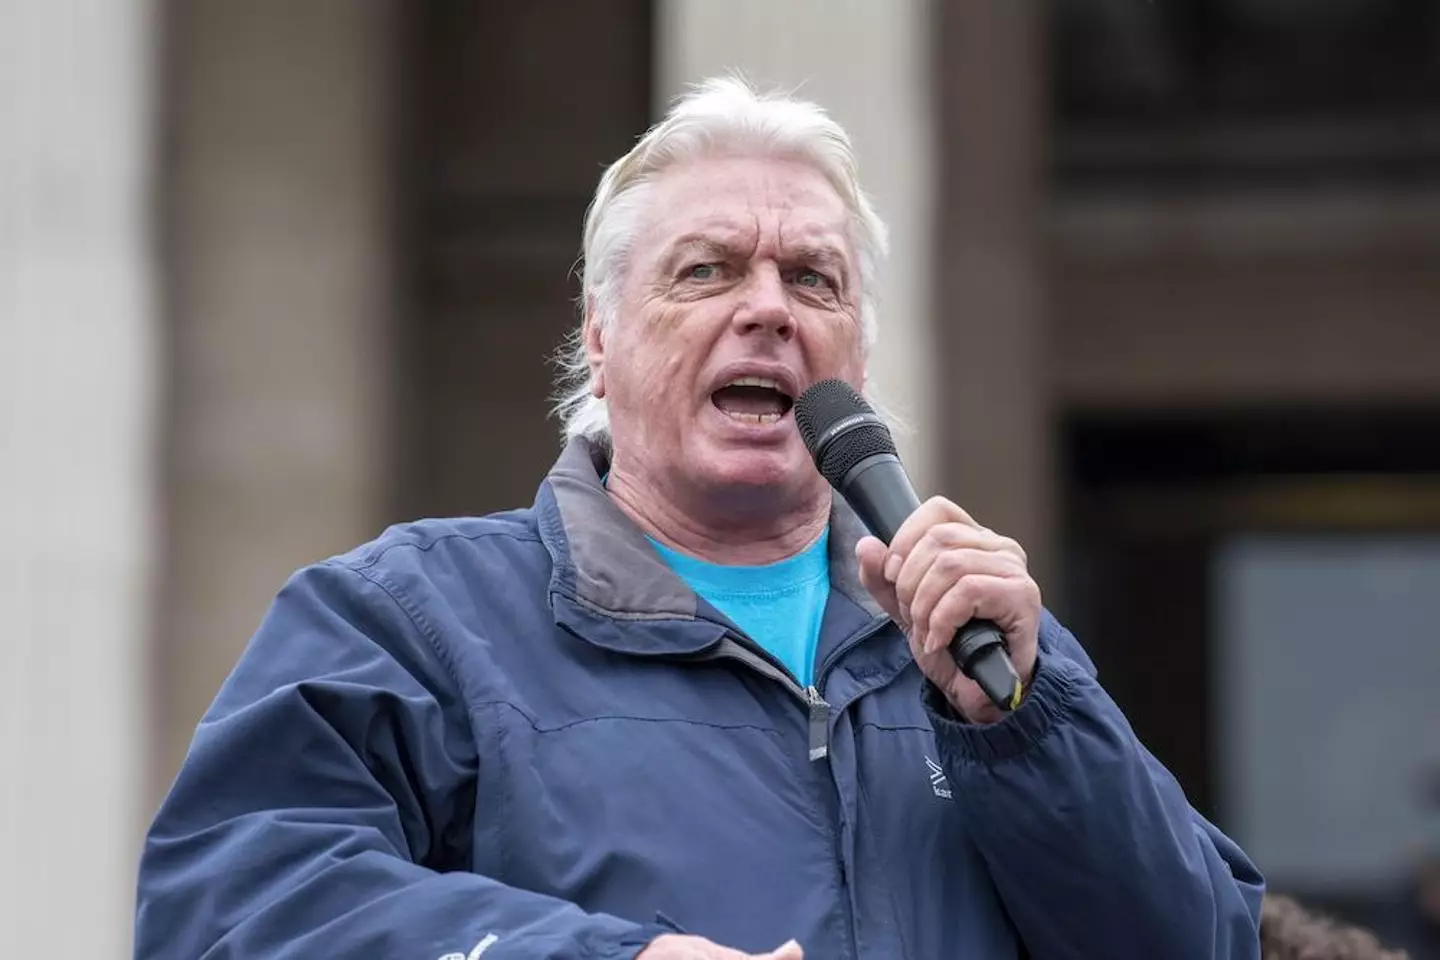 Icke has been banned from a number of social media platforms in recent years.